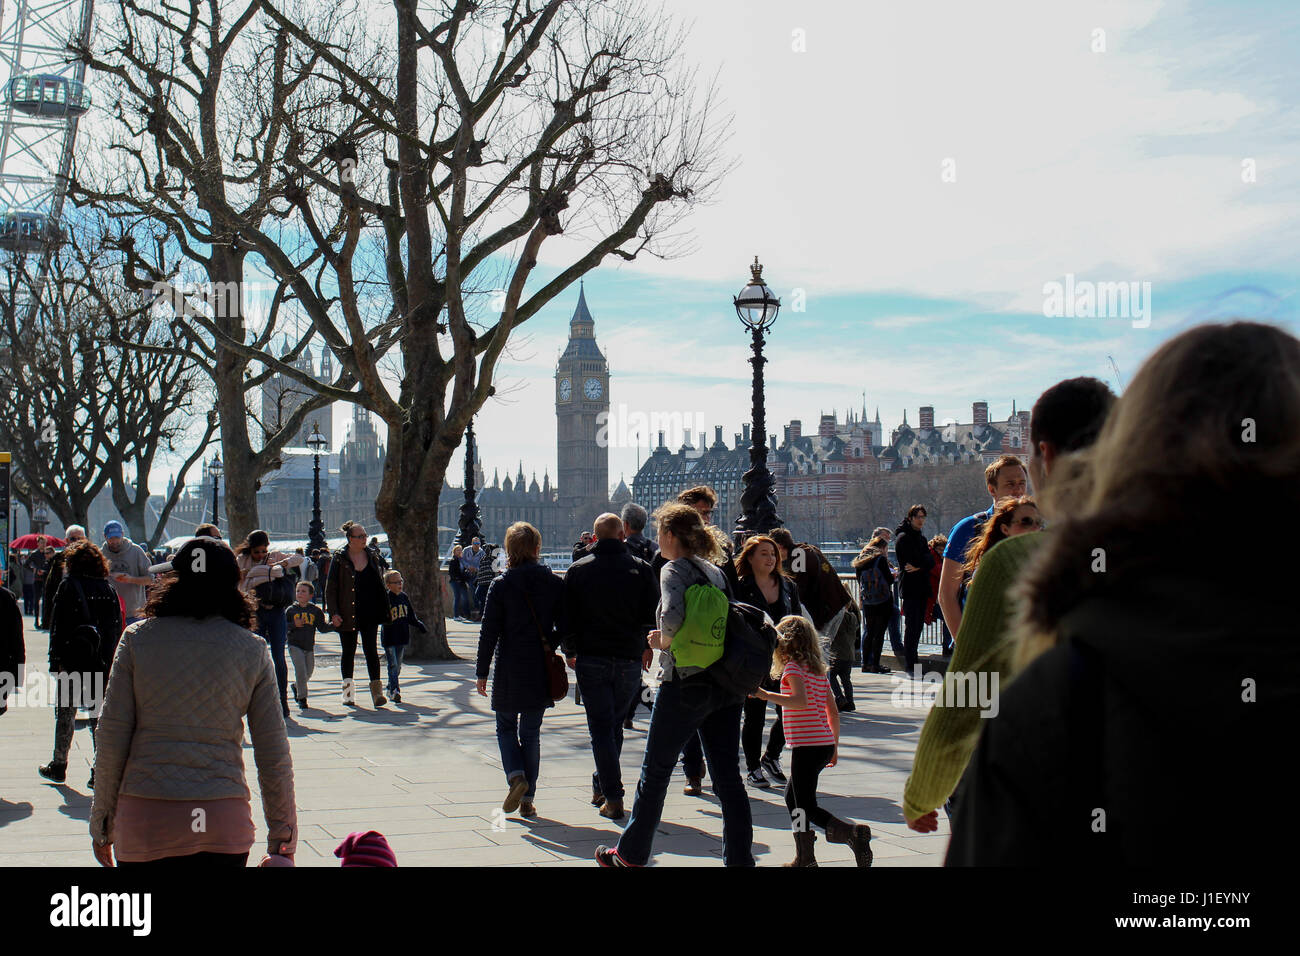 Big Ben visible in the background as crowds walk along South Bank in London on a sunny but cold spring day - blue skies and clouds Stock Photo